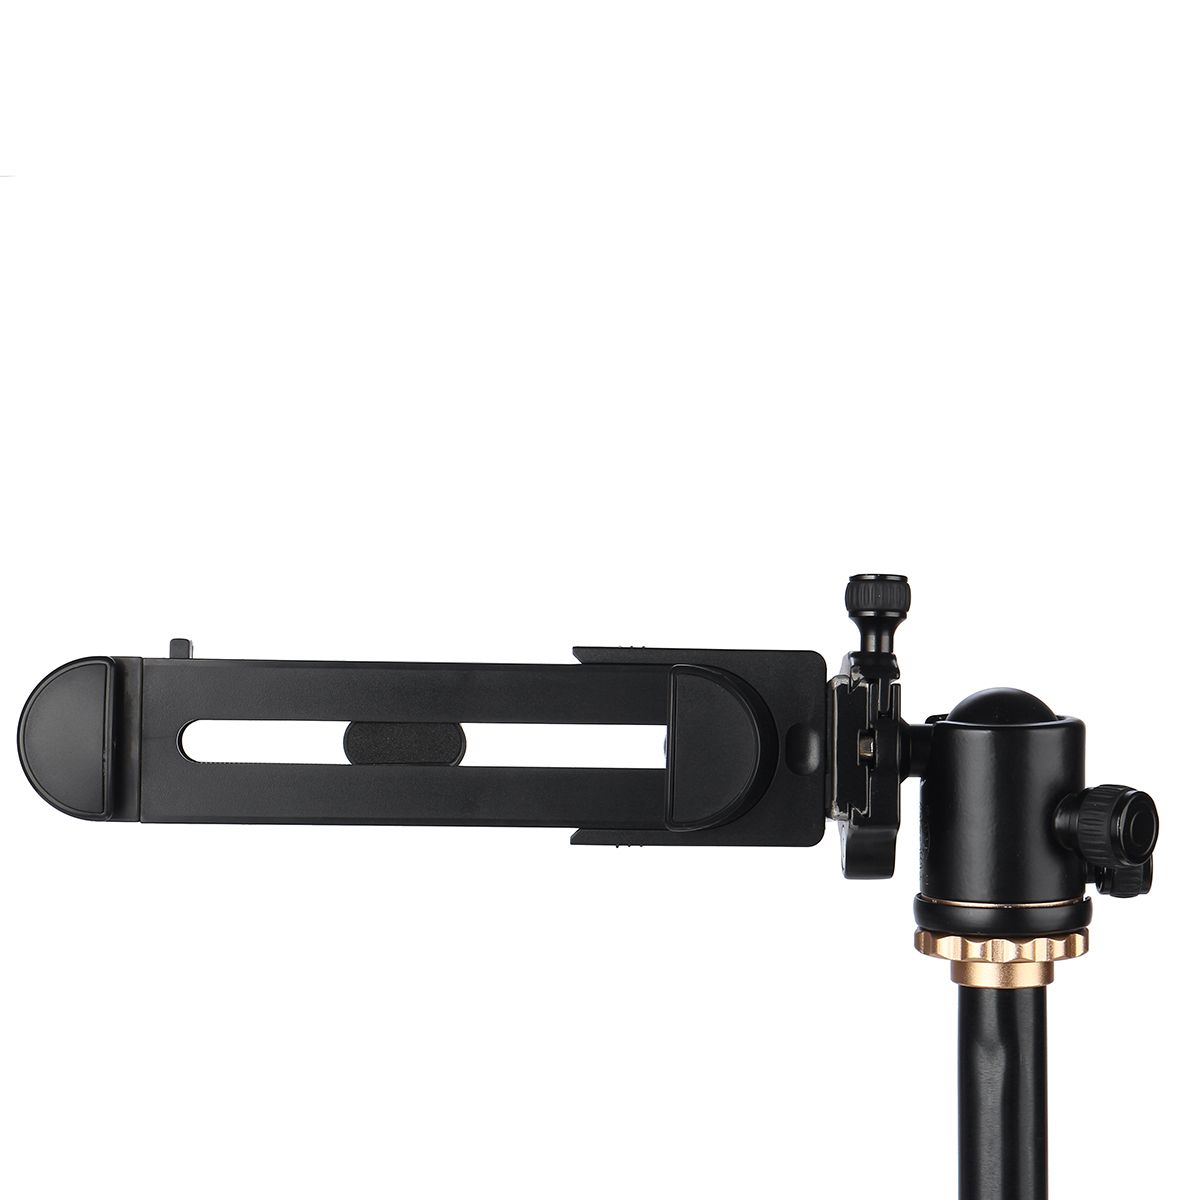 Ulanzi-Adjustable-Clamp-for-Cell-Phone-Tablet-for-iPad-Air-Pro-Mini-3-14-inch-Tablet-Phone-Tripod-Cl-1707242